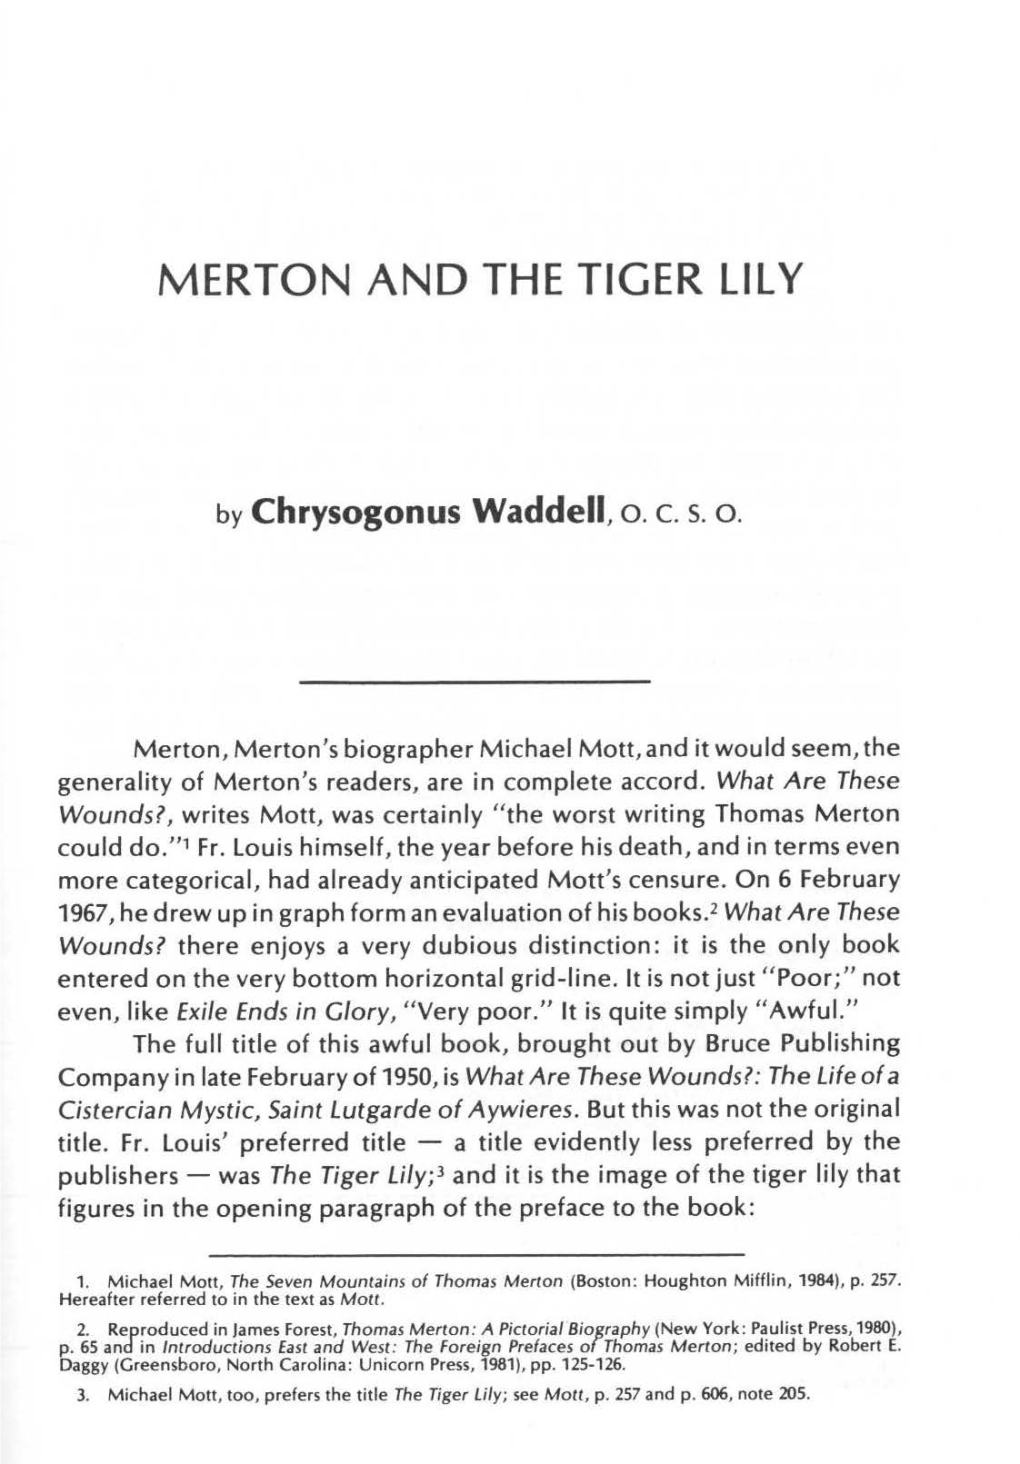 Merton and the Tiger Lily